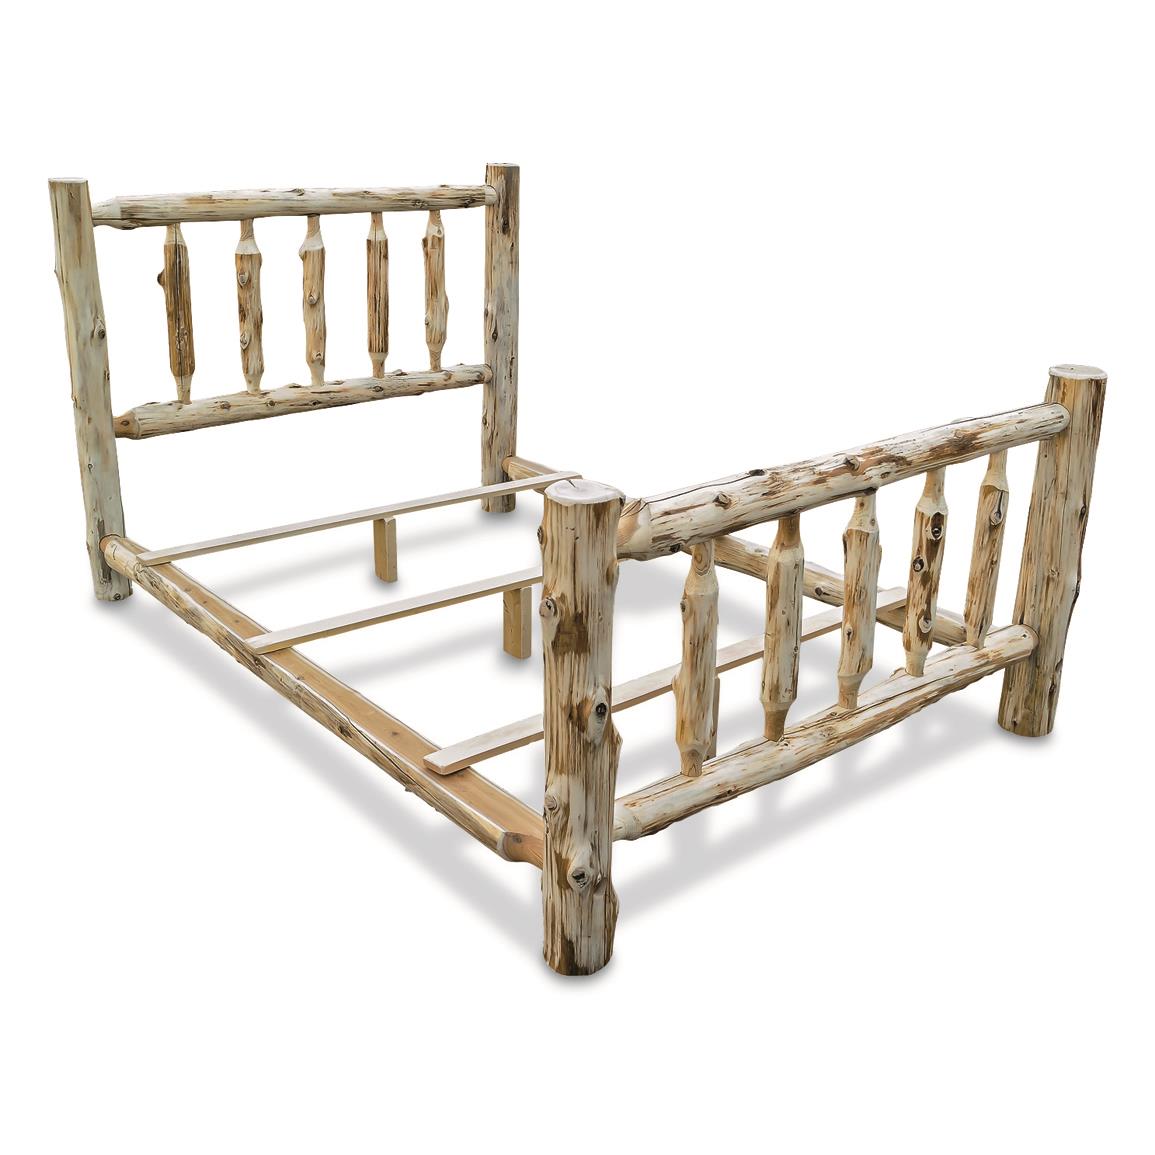 Fireside Lodge Voyageur Bed in a Box, Twin